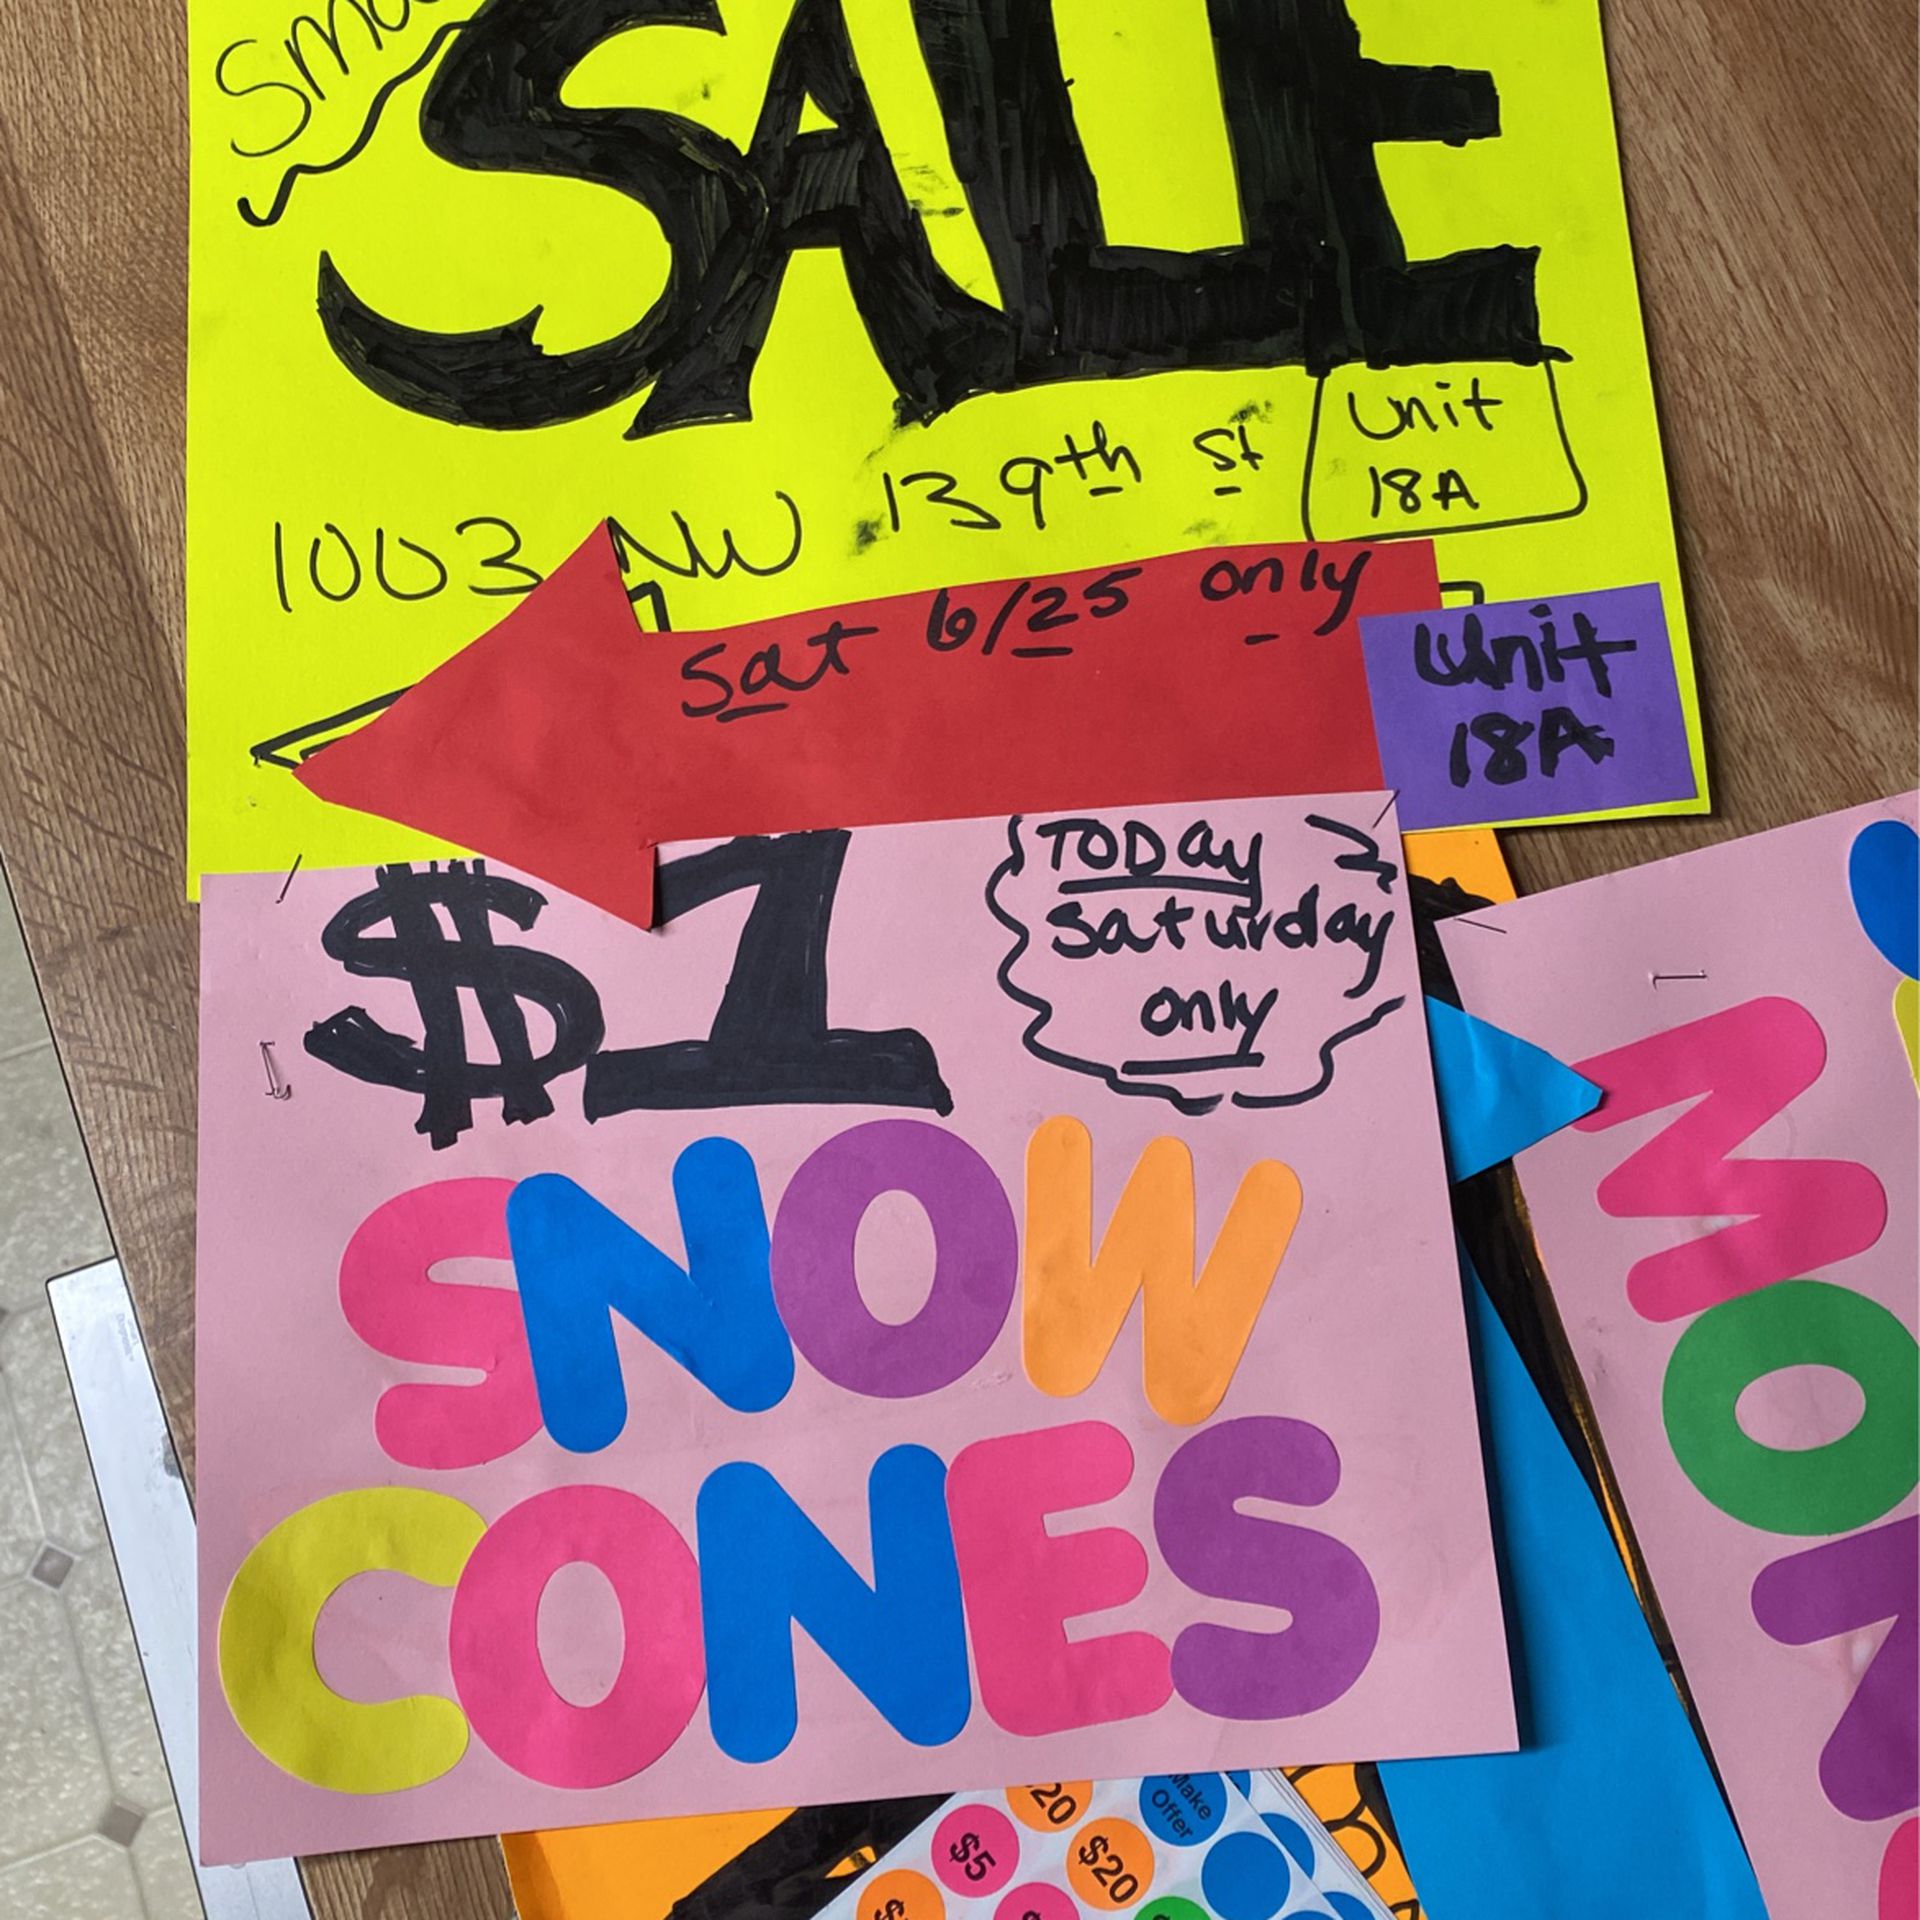 Yard Sale Today Only!!! $1 Snow Comes Too!!! 